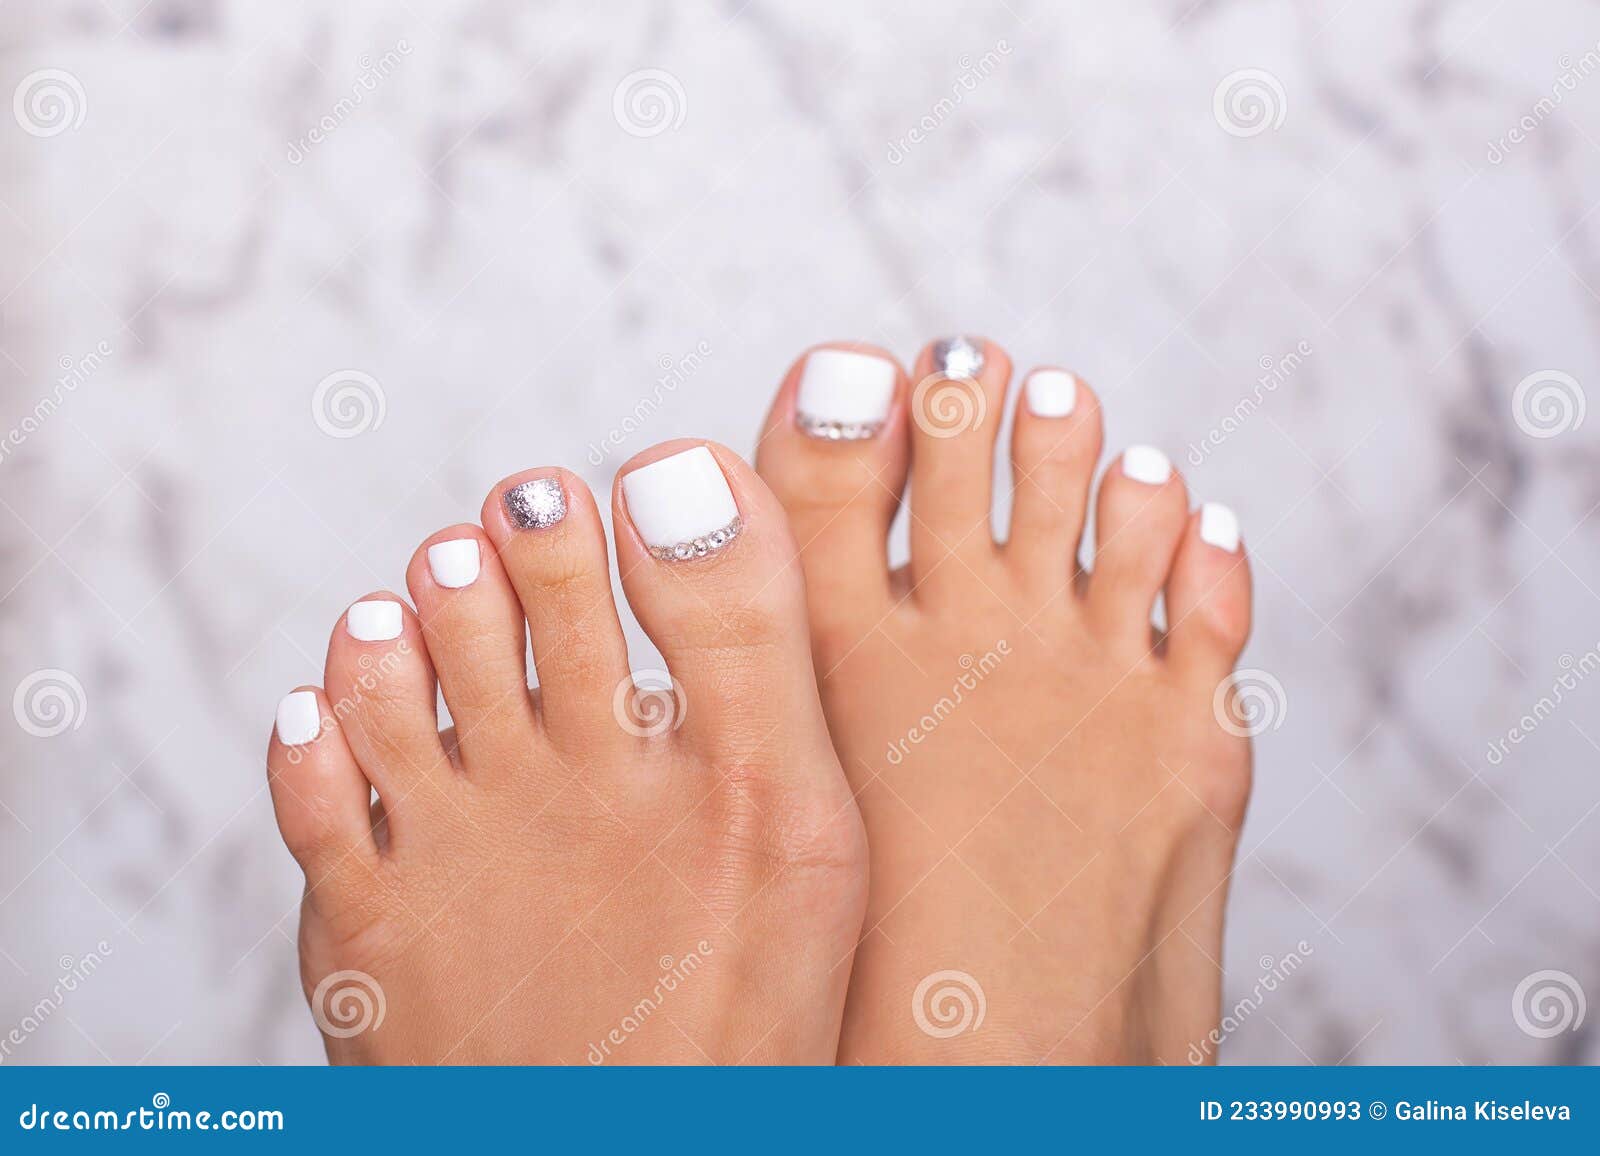 How to surprise someone by Rather Rude Cards: Best White Wedding Pedicure  Toenail Designs ideas